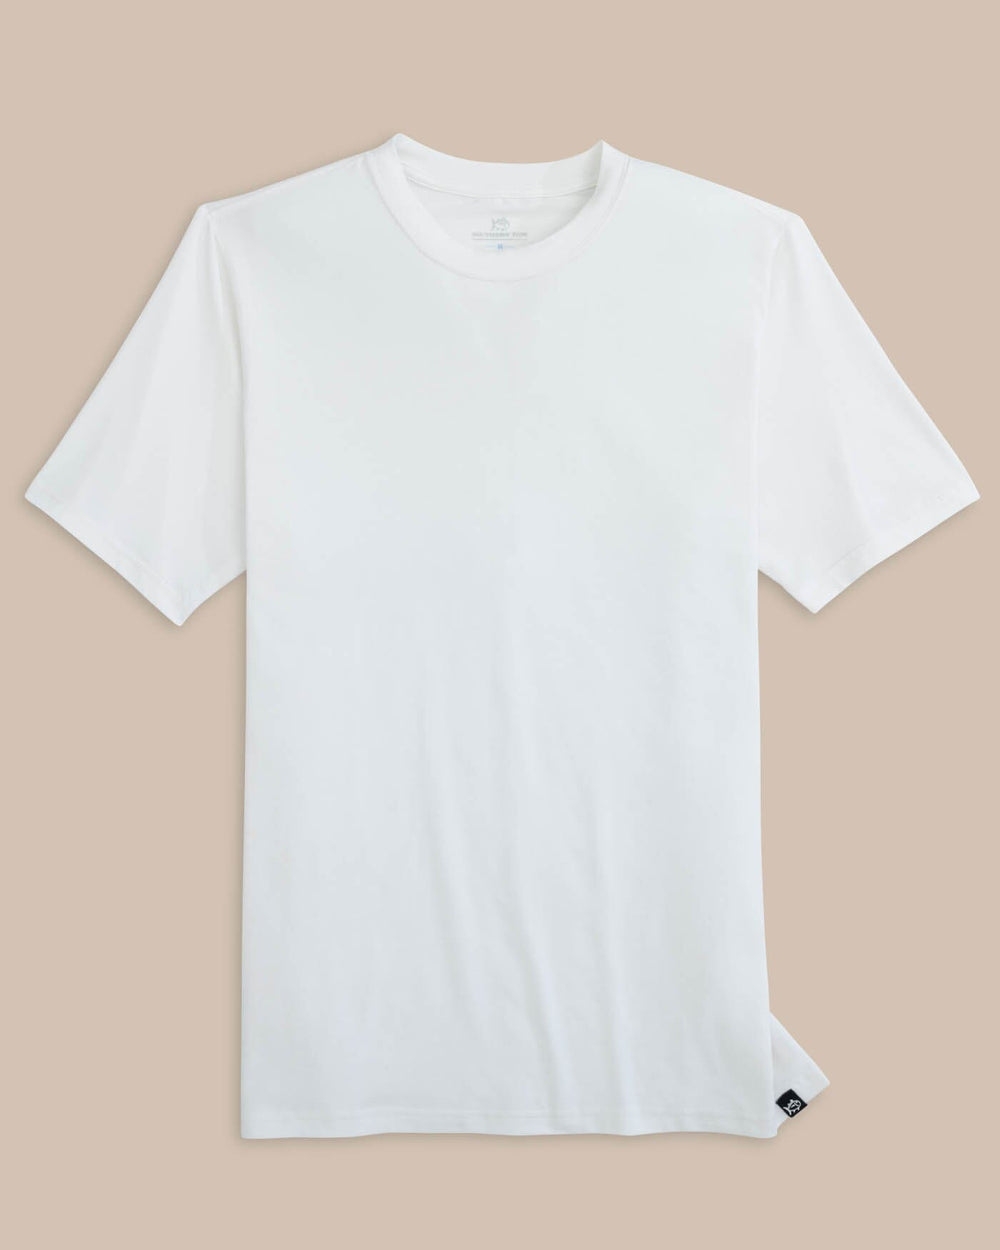 The front view of the Southern Tide The Seaport T-shirt by Southern Tide - Classic White